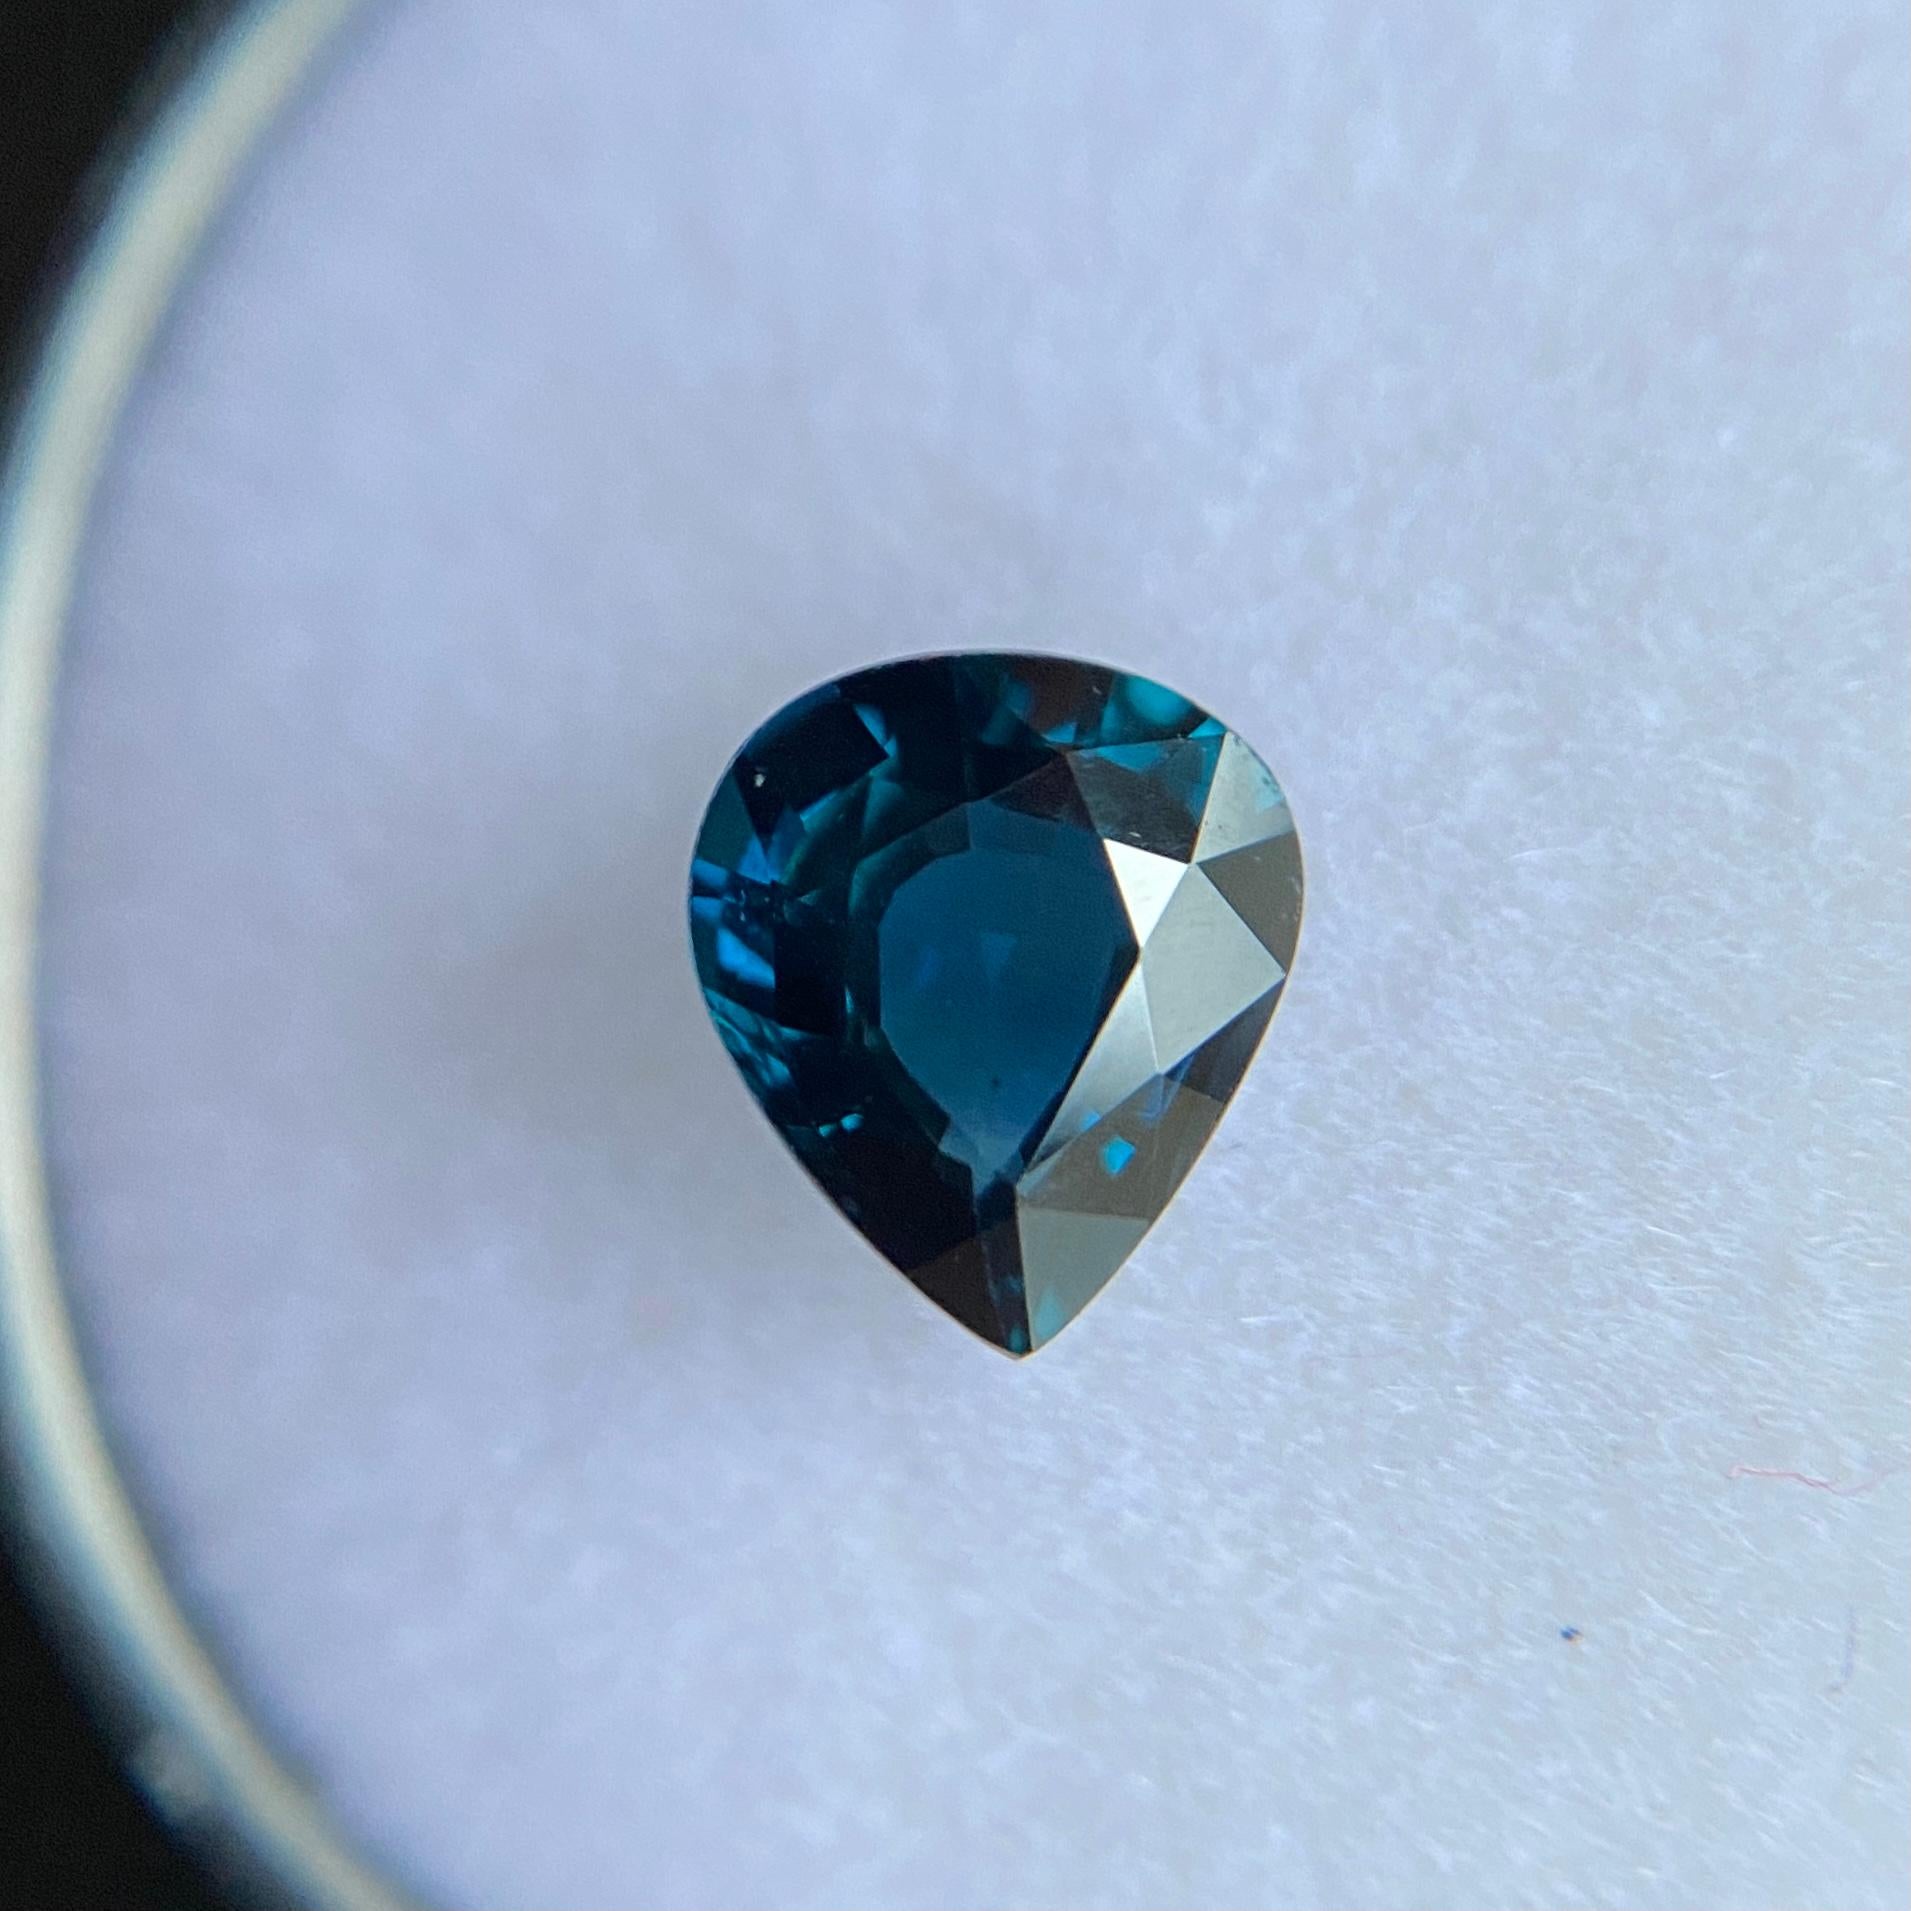 FINE Deep Blue Sapphire Gemstone.

1.02 Carat with a beautiful deep blue colour and excellent clarity, a very clean stone.

Also has an excellent pear teardrop cut and polish to show great shine and colour, would look lovely in jewellery. Measures